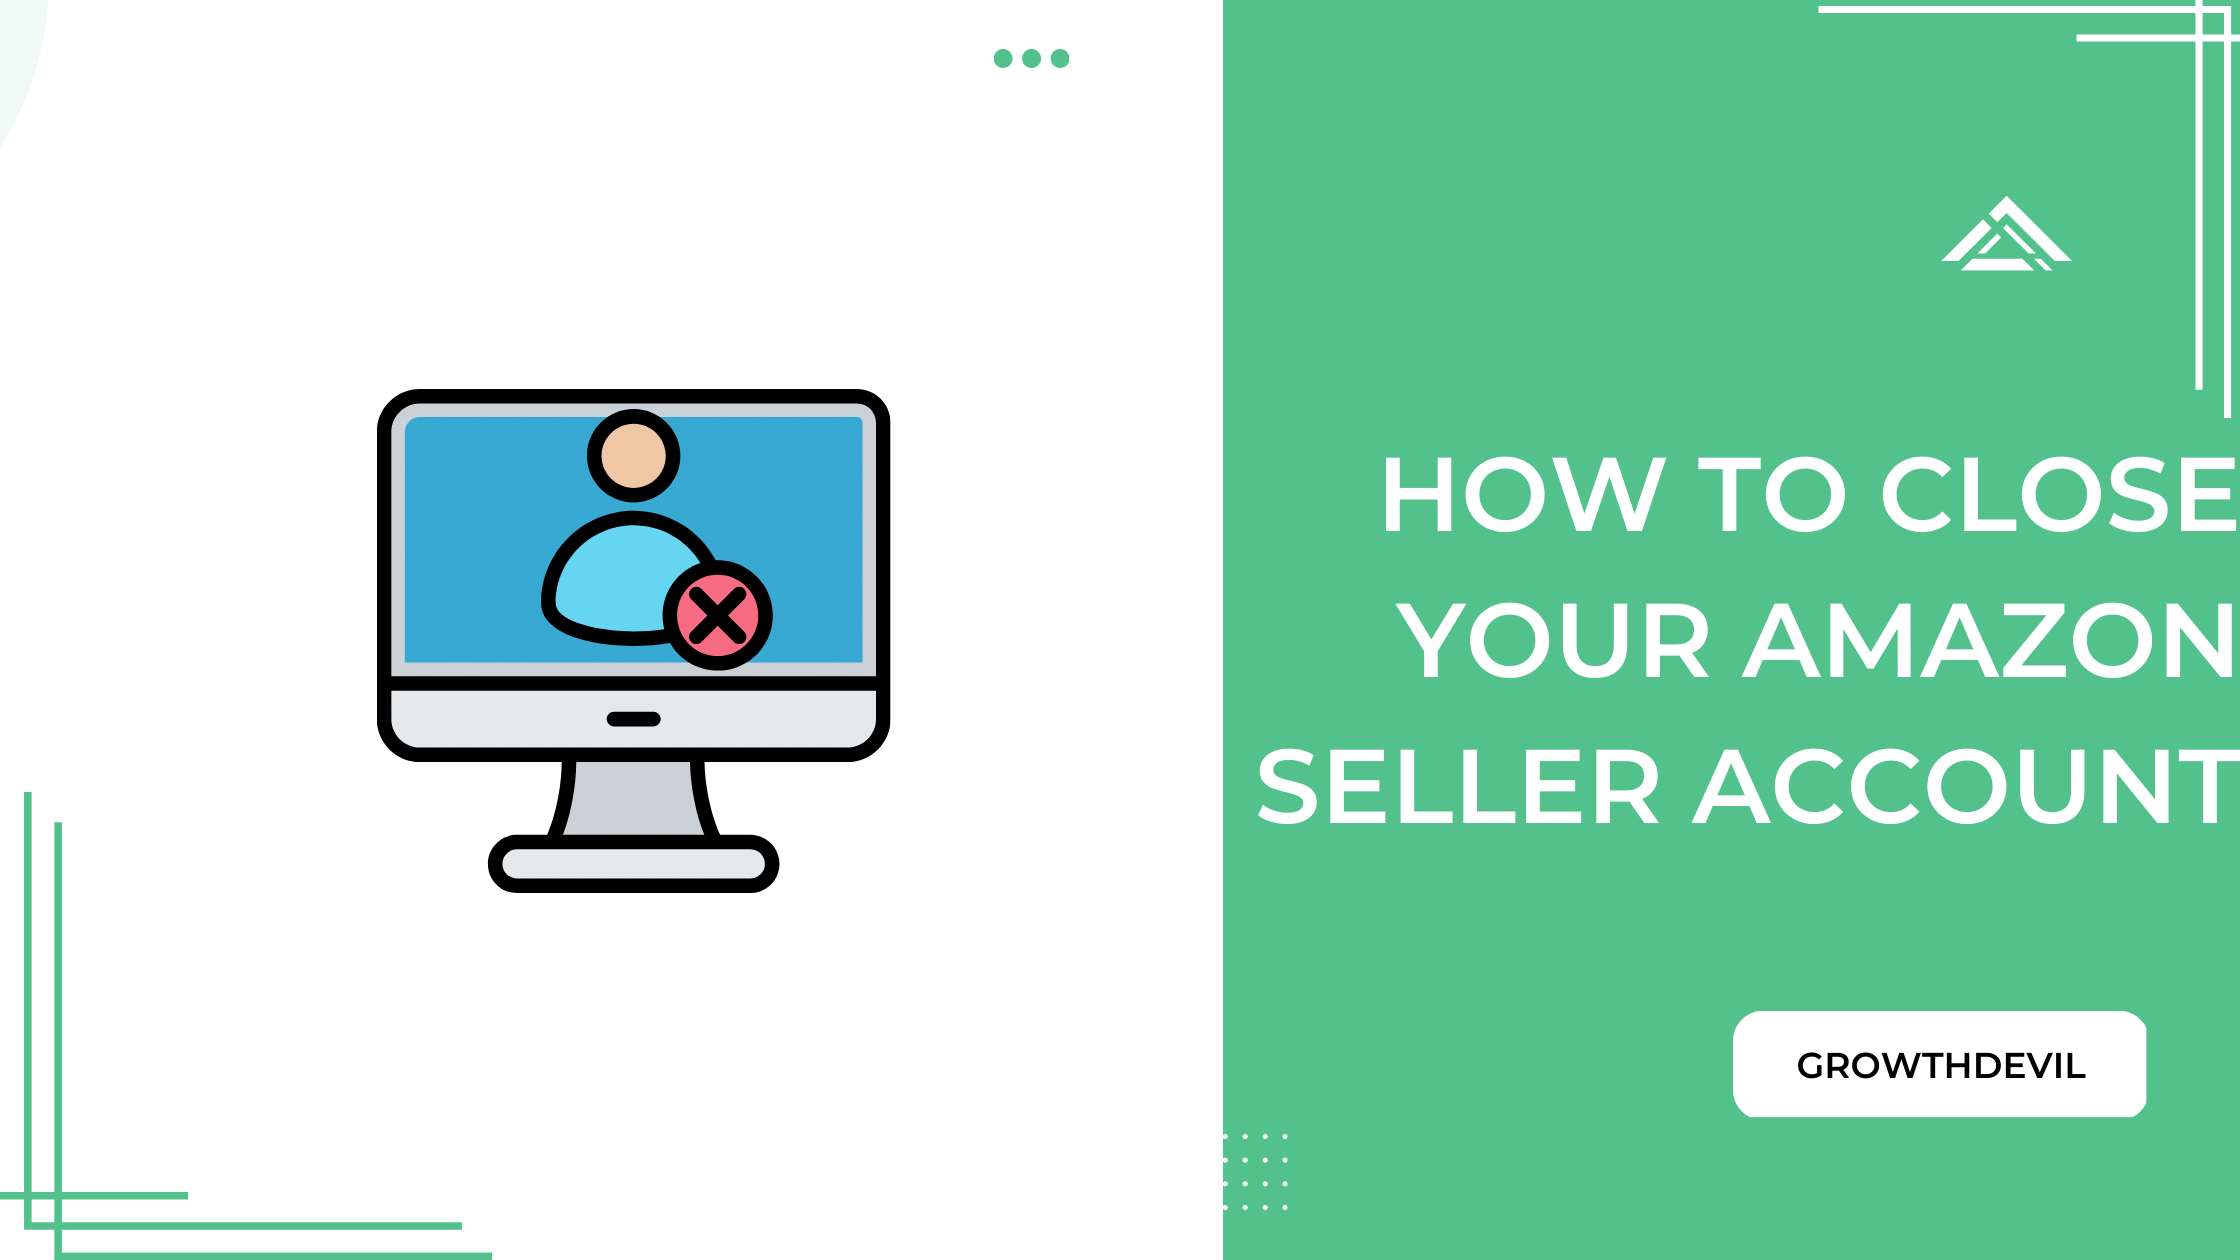 How To Close Your Amazon Seller Account - GrowthDevil